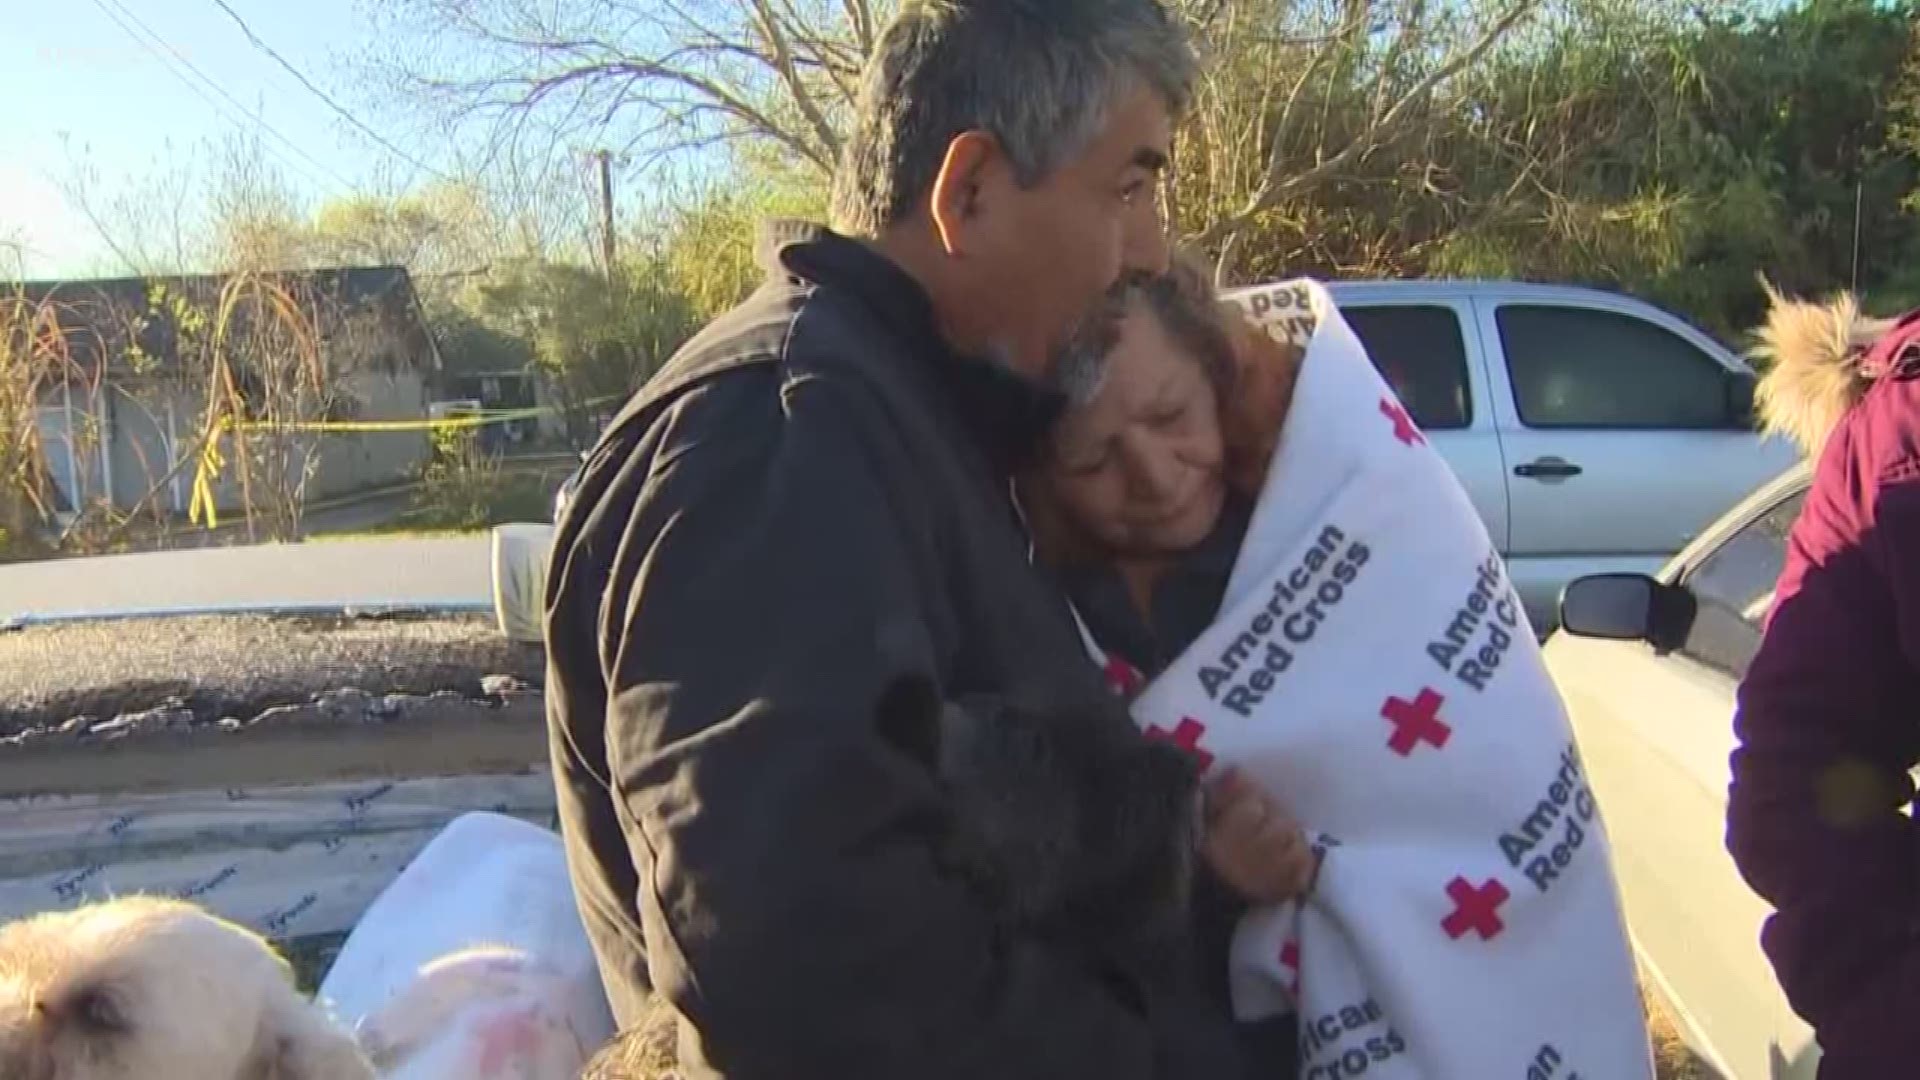 A Houston family of eight is homeless after losing everything when their home of 25 years burned in an early-morning fire on Christmas Eve.